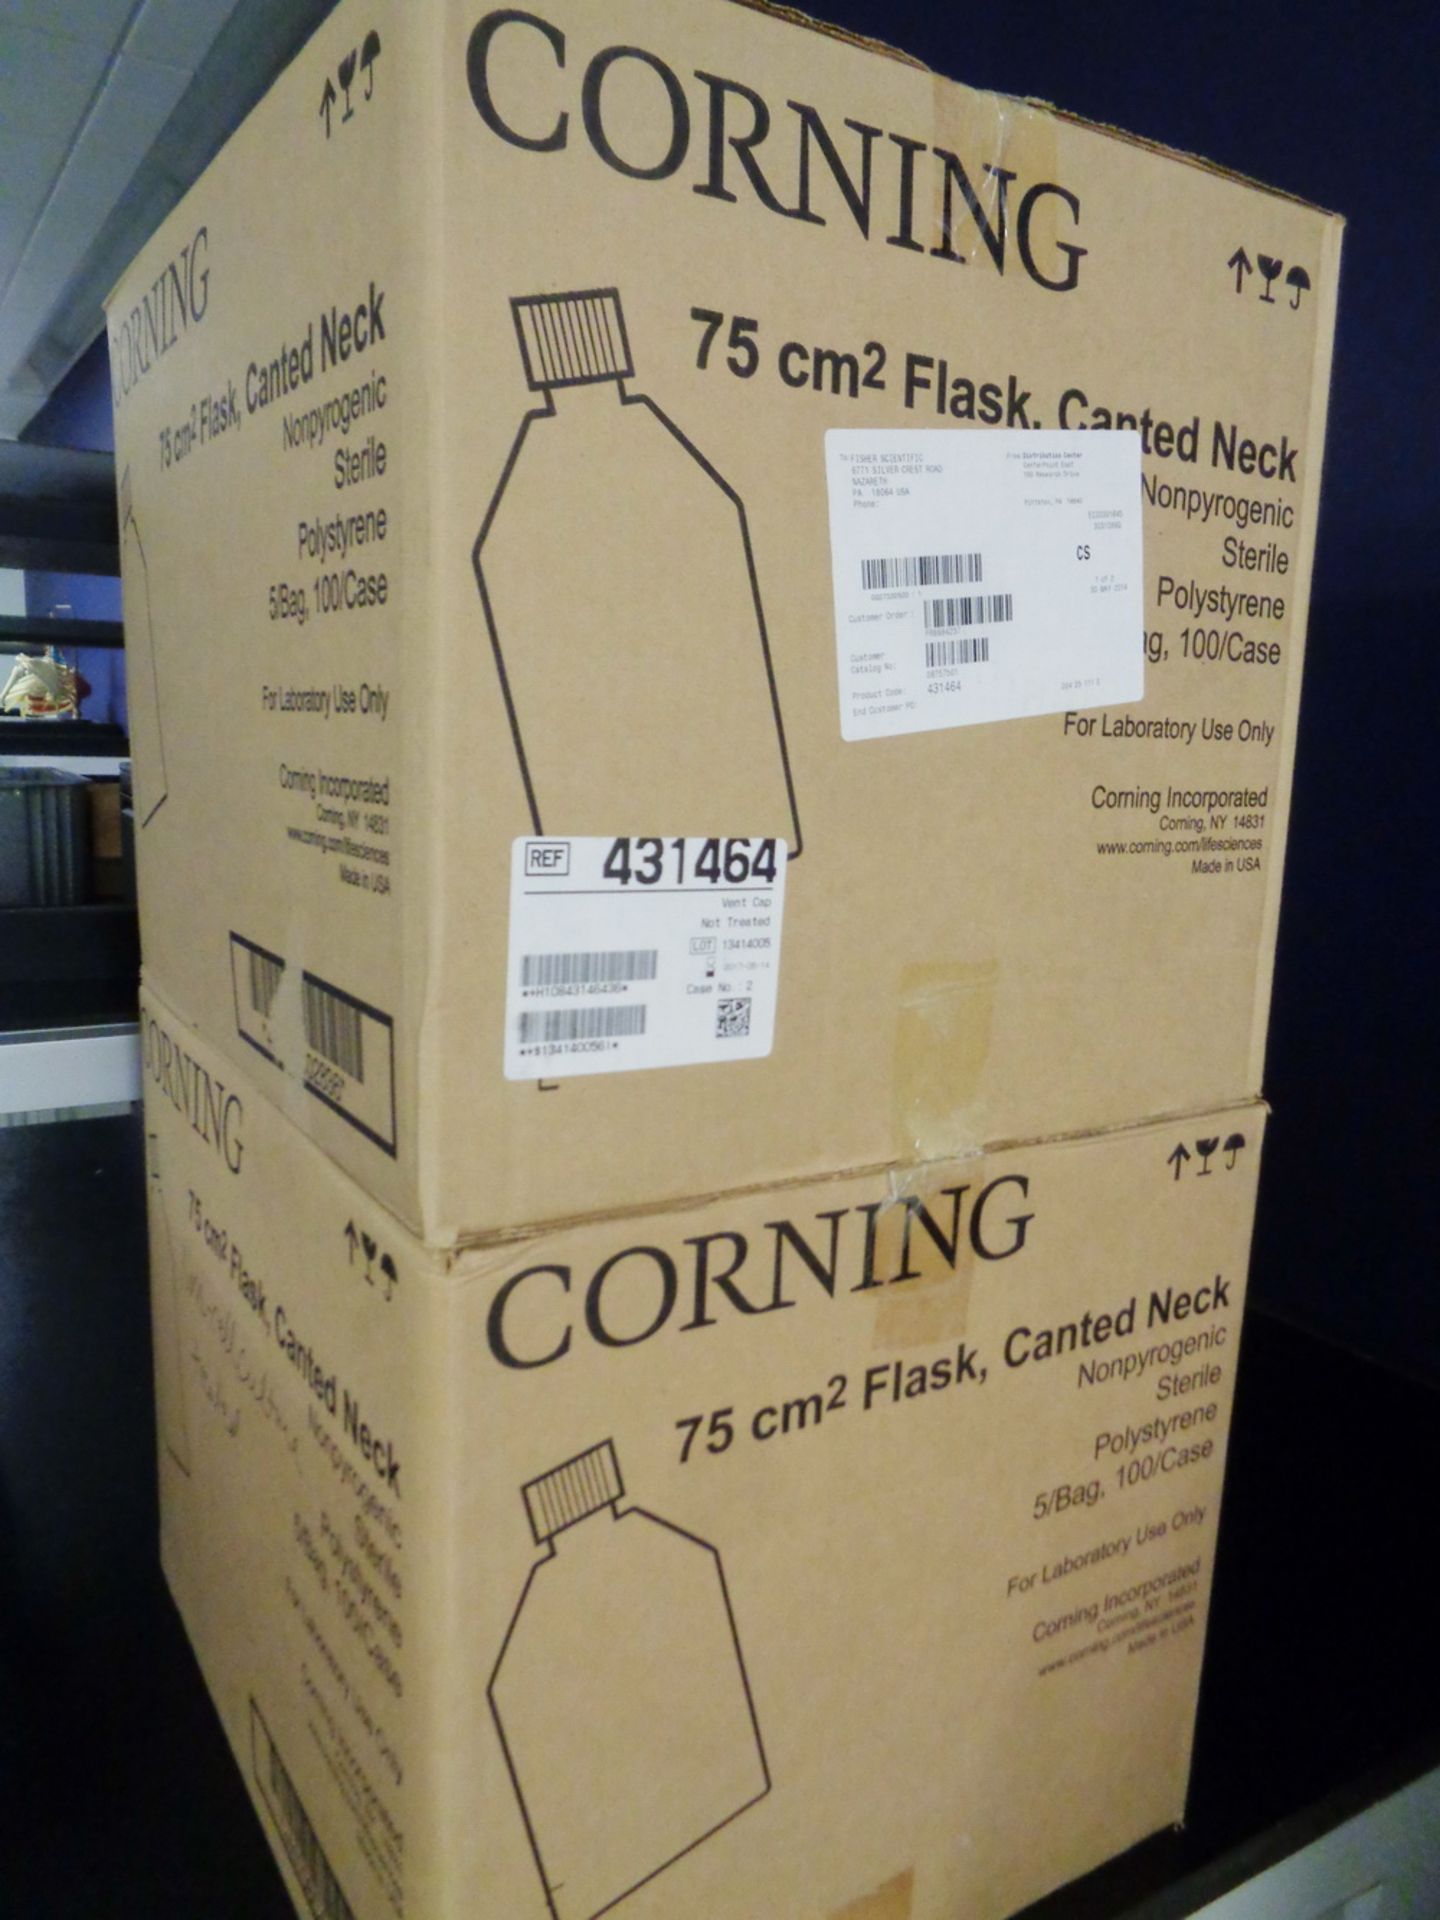 (2) Boxes of Corning 75 cm2 Flasks, canted neck